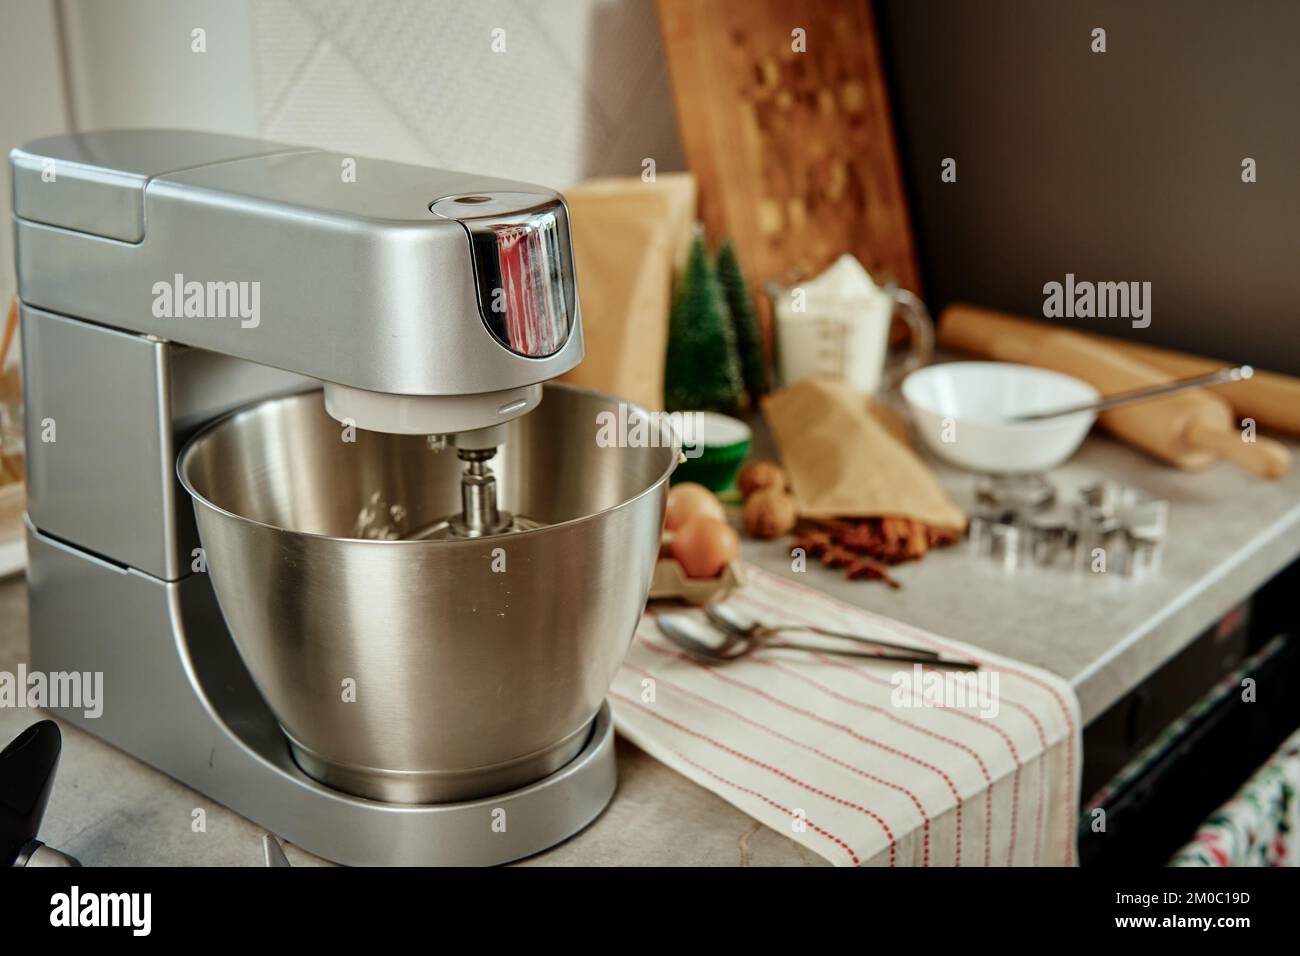 https://c8.alamy.com/comp/2M0C19D/preparation-of-dough-in-an-electric-mixer-at-home-professional-mixer-for-kneading-dough-and-food-ingredients-in-kitchen-interior-modern-appliances-in-the-kitchen-2M0C19D.jpg